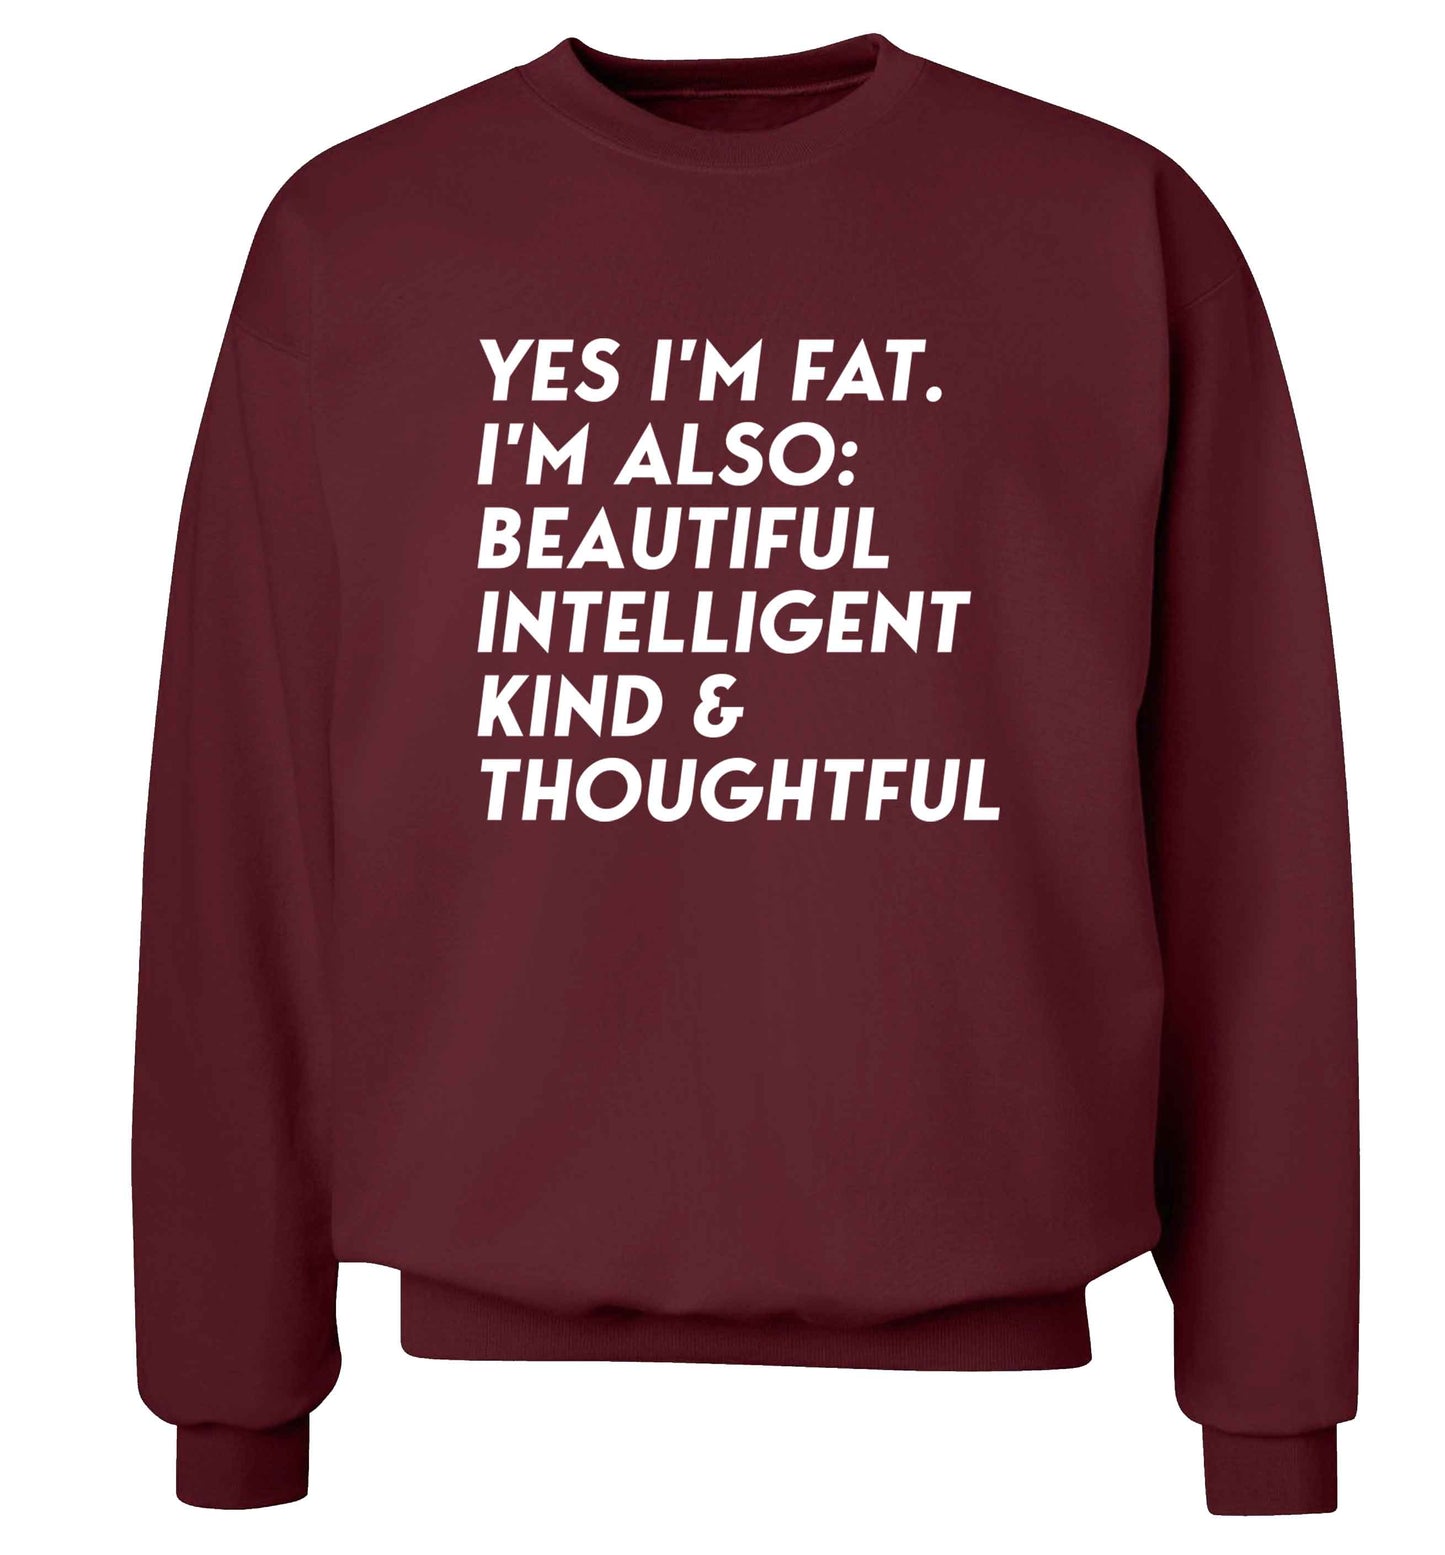 Yes I'm fat. I'm also: Beautiful intelligent kind and thoughtful adult's unisex maroon sweater 2XL